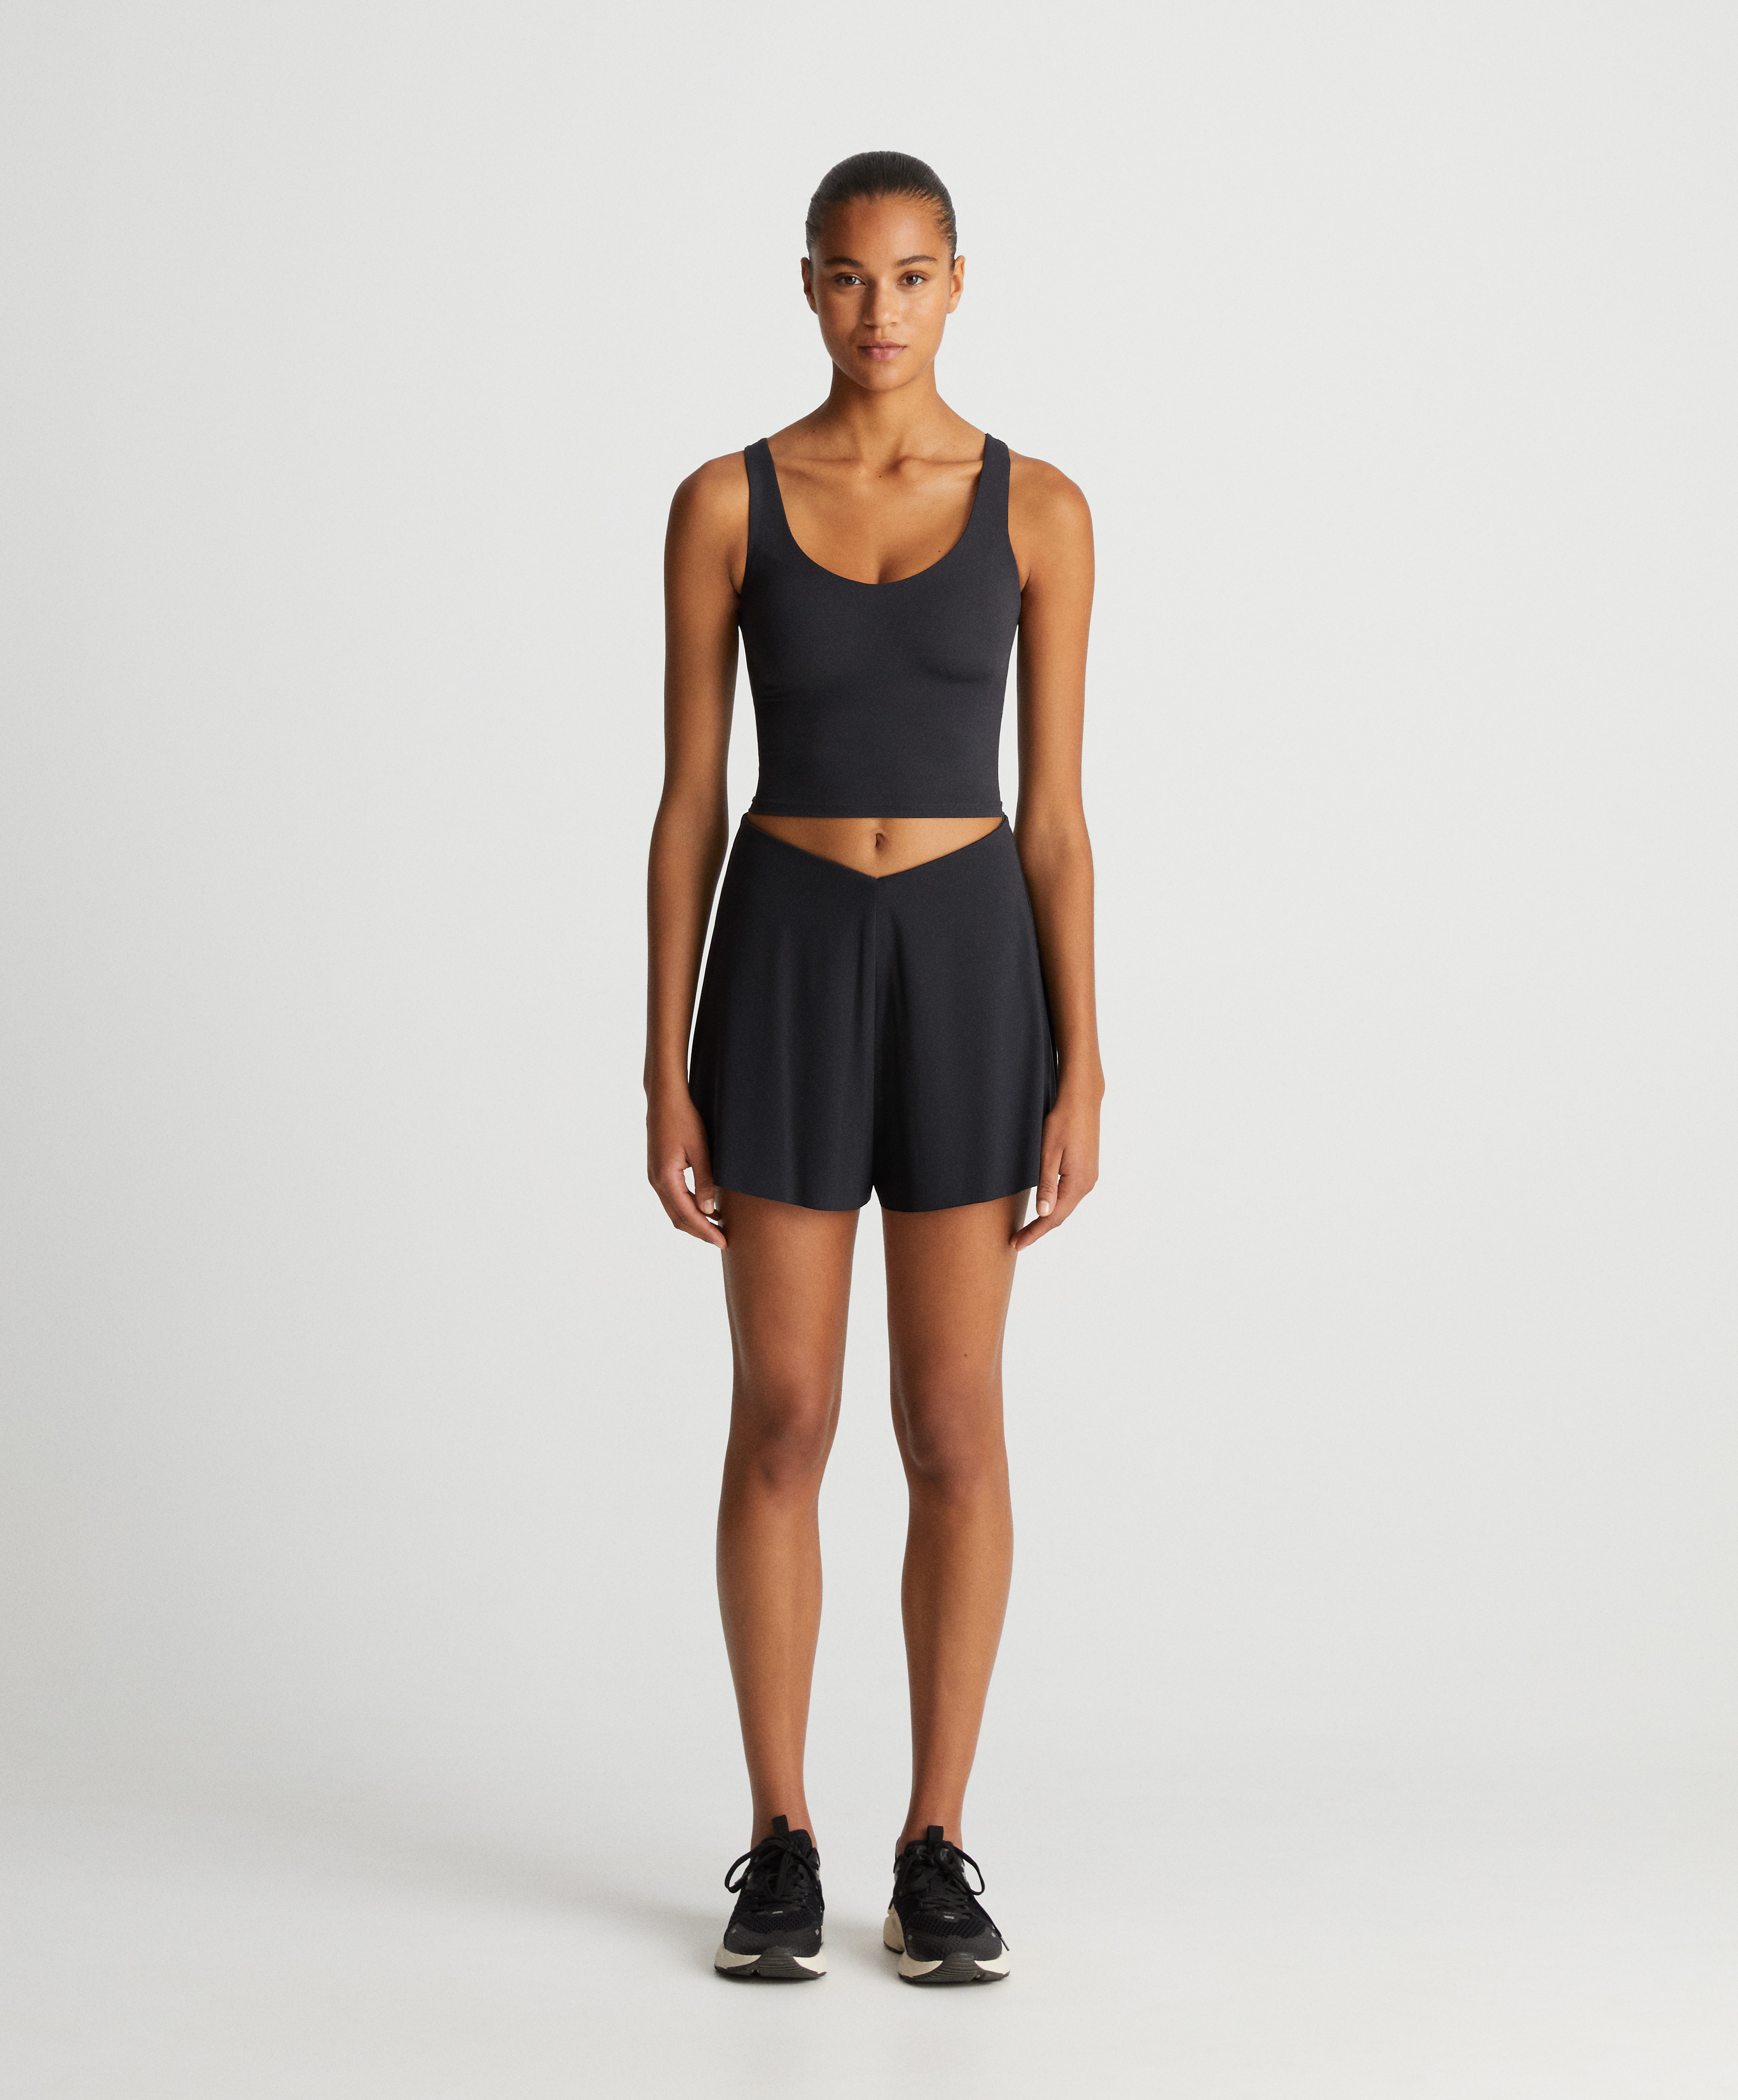 Total look shorts light touch crne boje